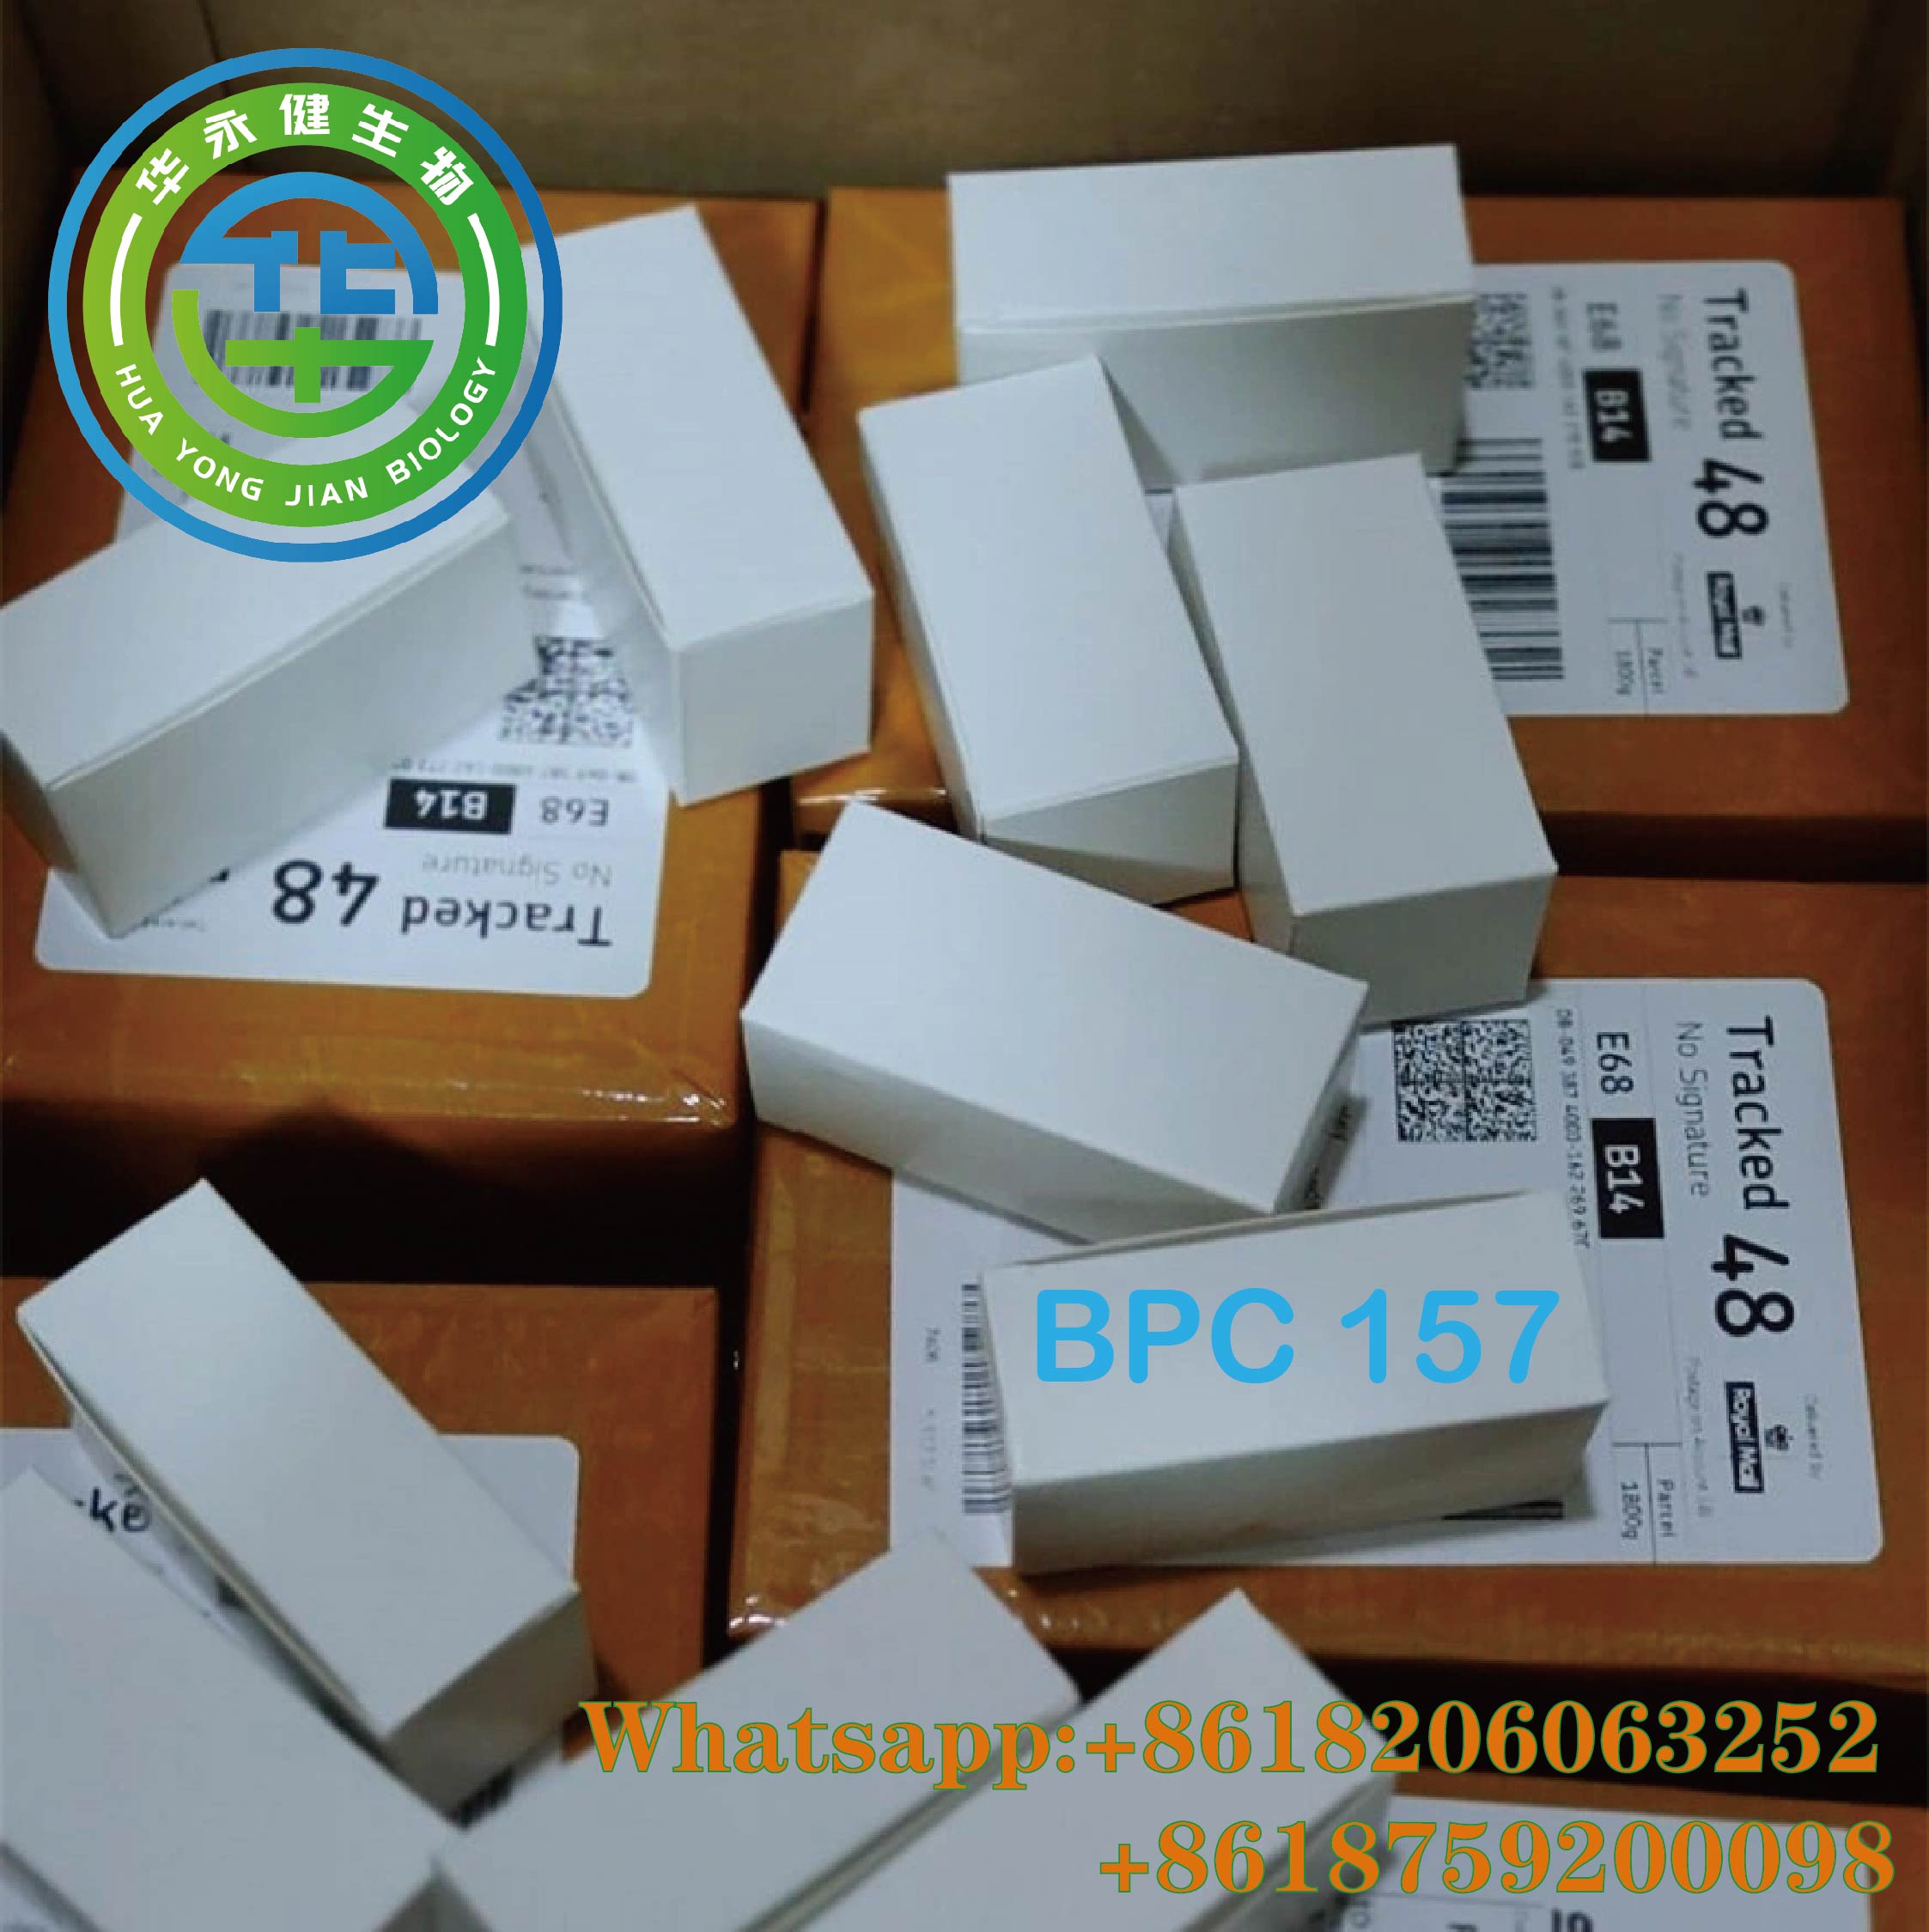 99% Purity Polypeptide Powder Pentadecapeptide Bpc 157 CAS: 137525-51-0 